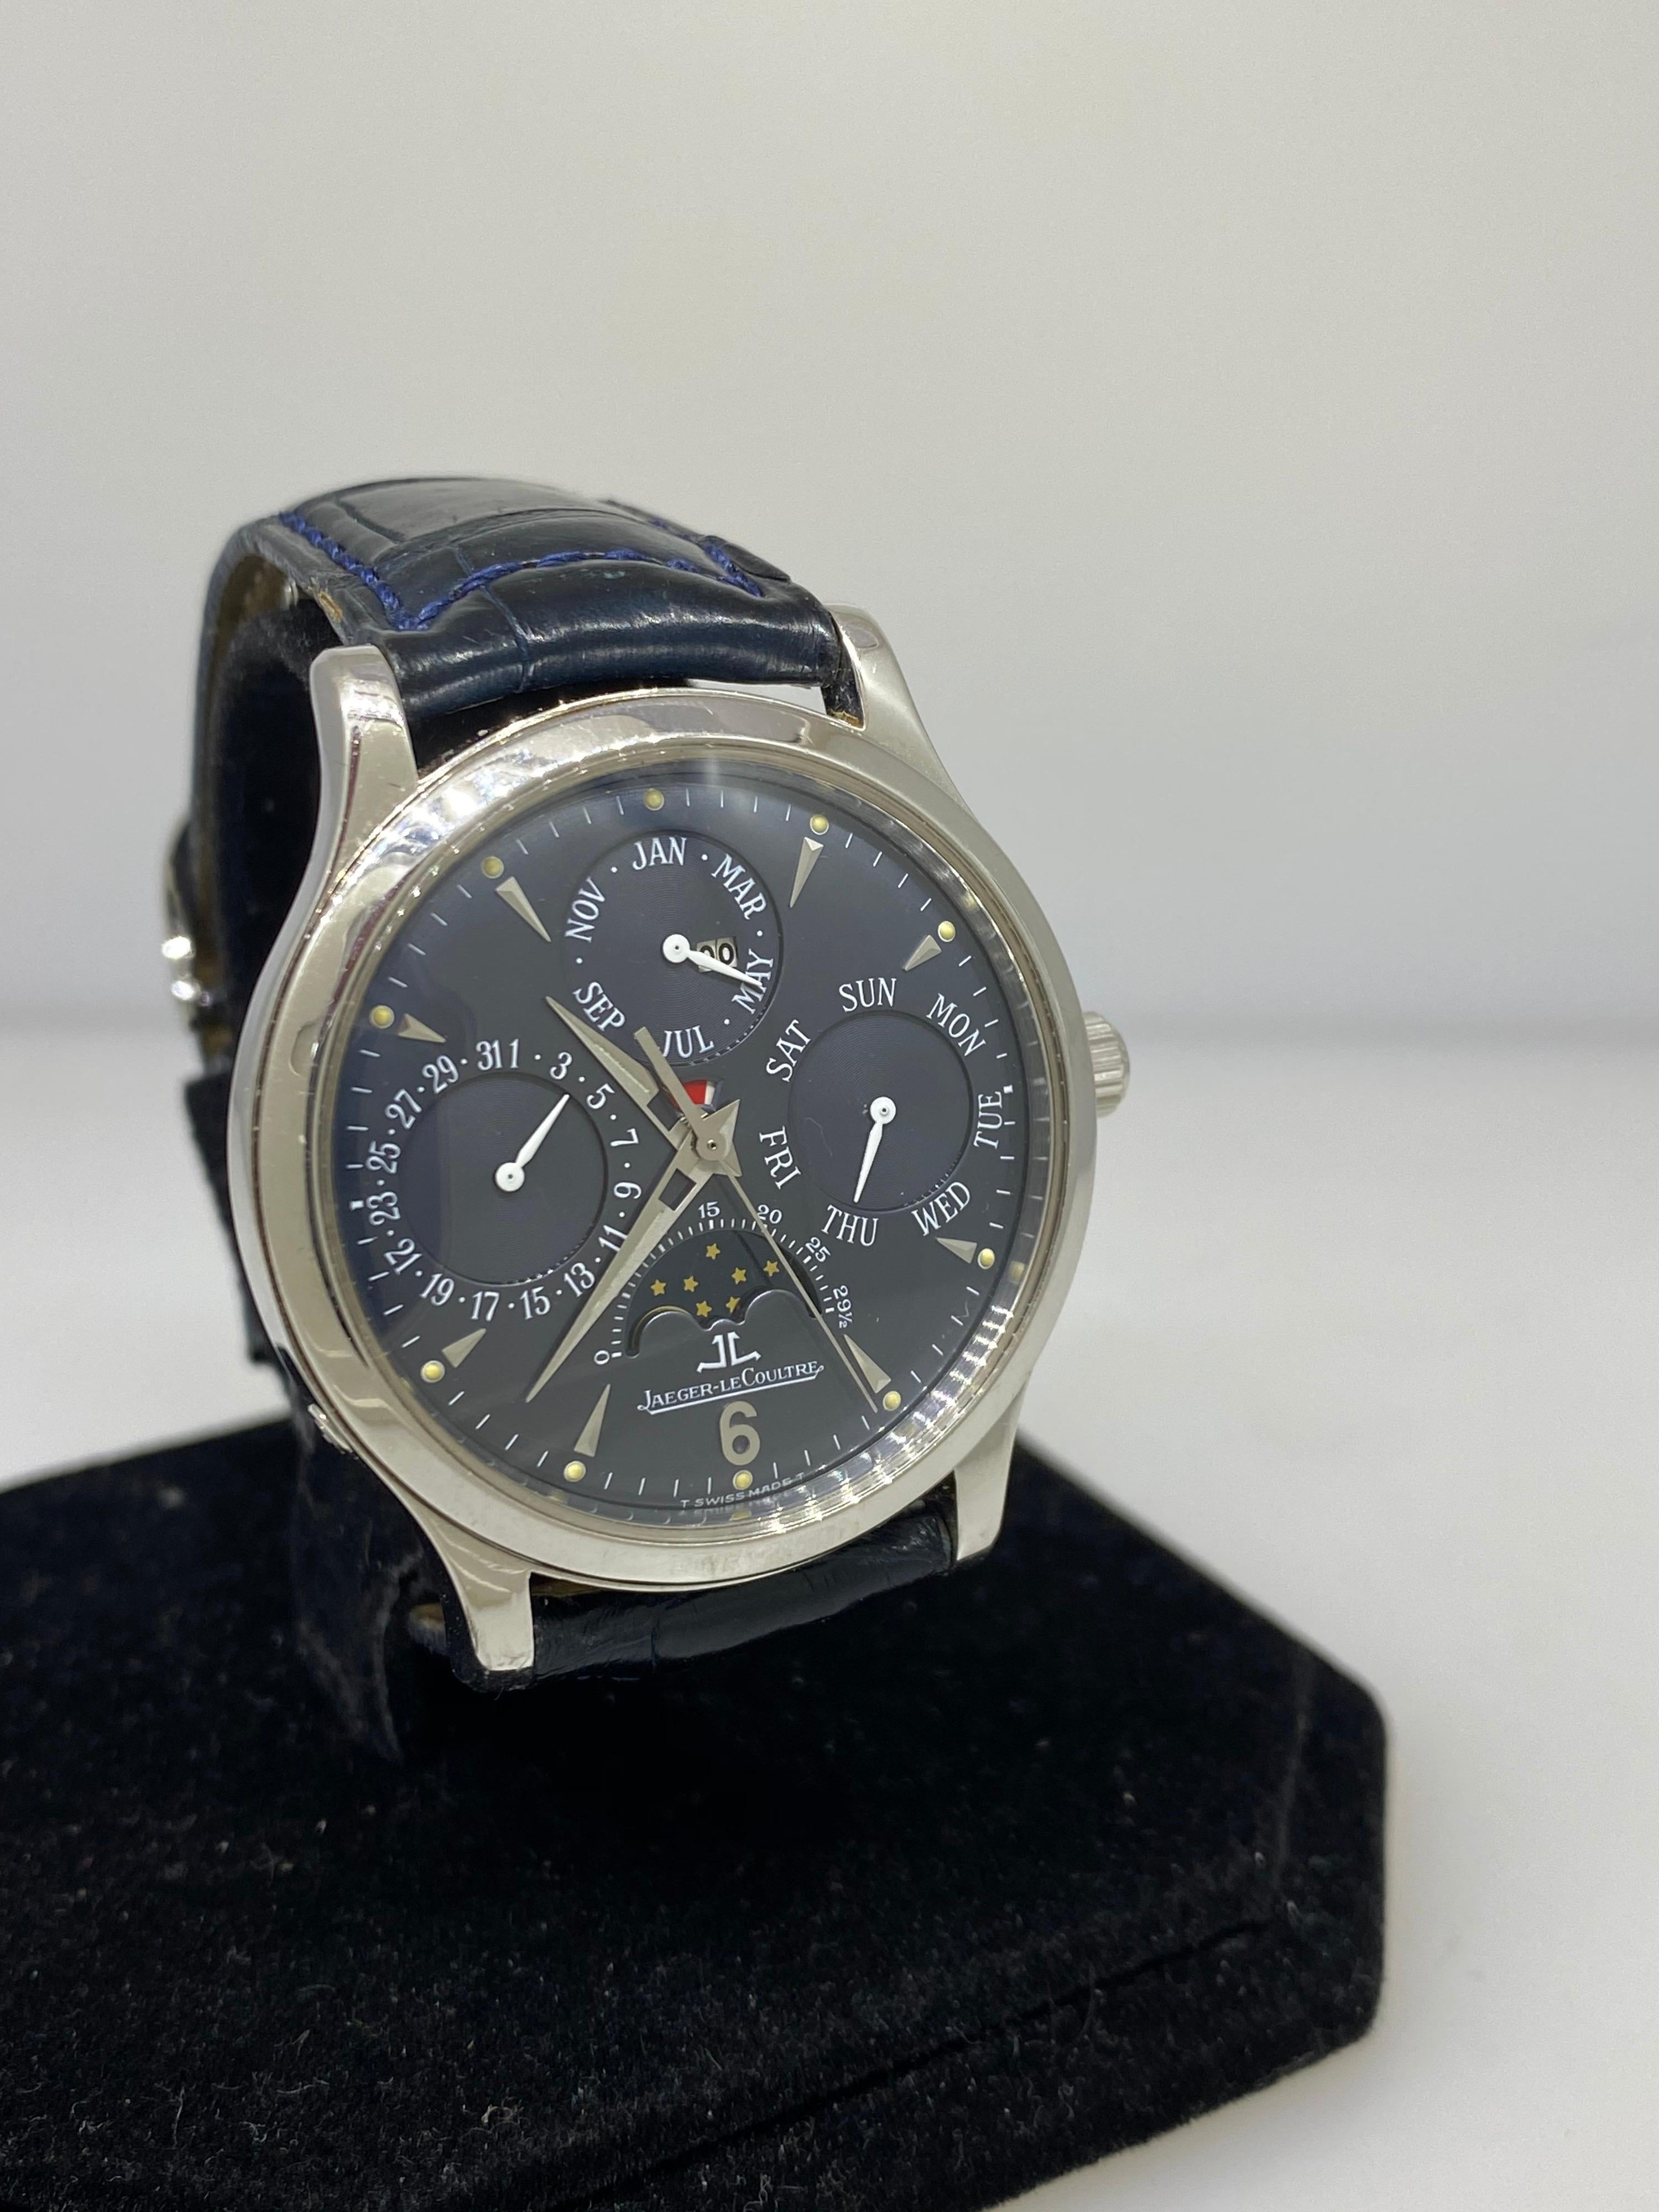 Jaeger LeCoultre Master Control Platinum Perpetual Calendar Men's Watch 140.6.80 In Excellent Condition For Sale In New York, NY